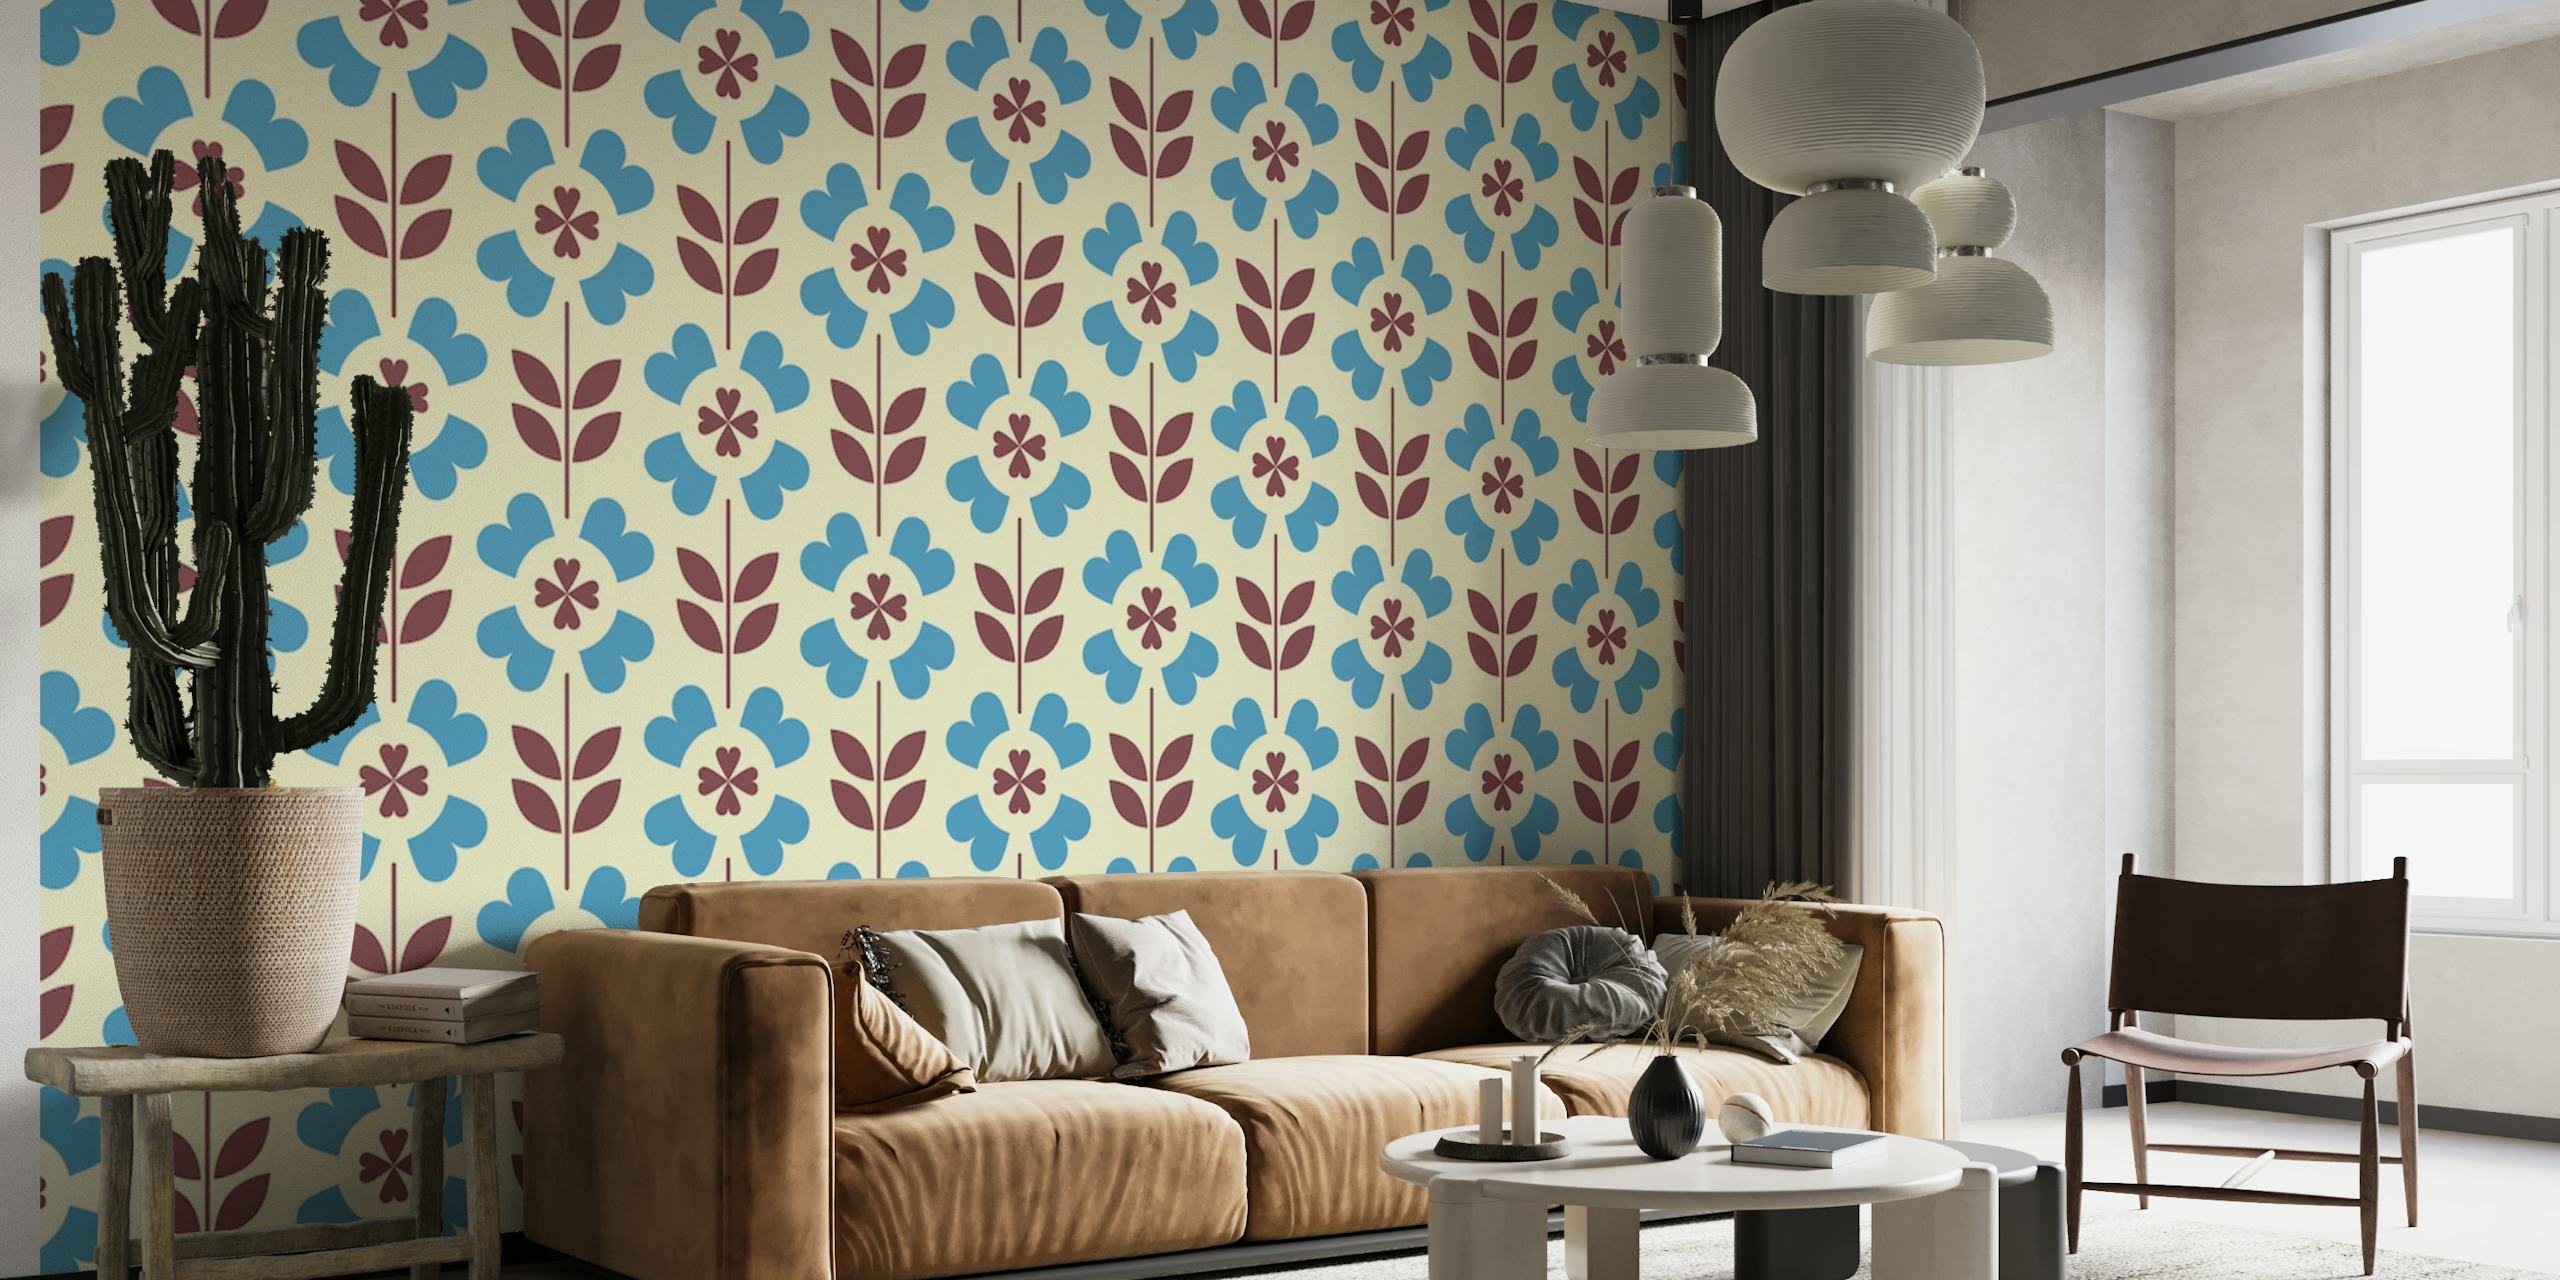 Vintage blue and burgundy floral pattern wall mural